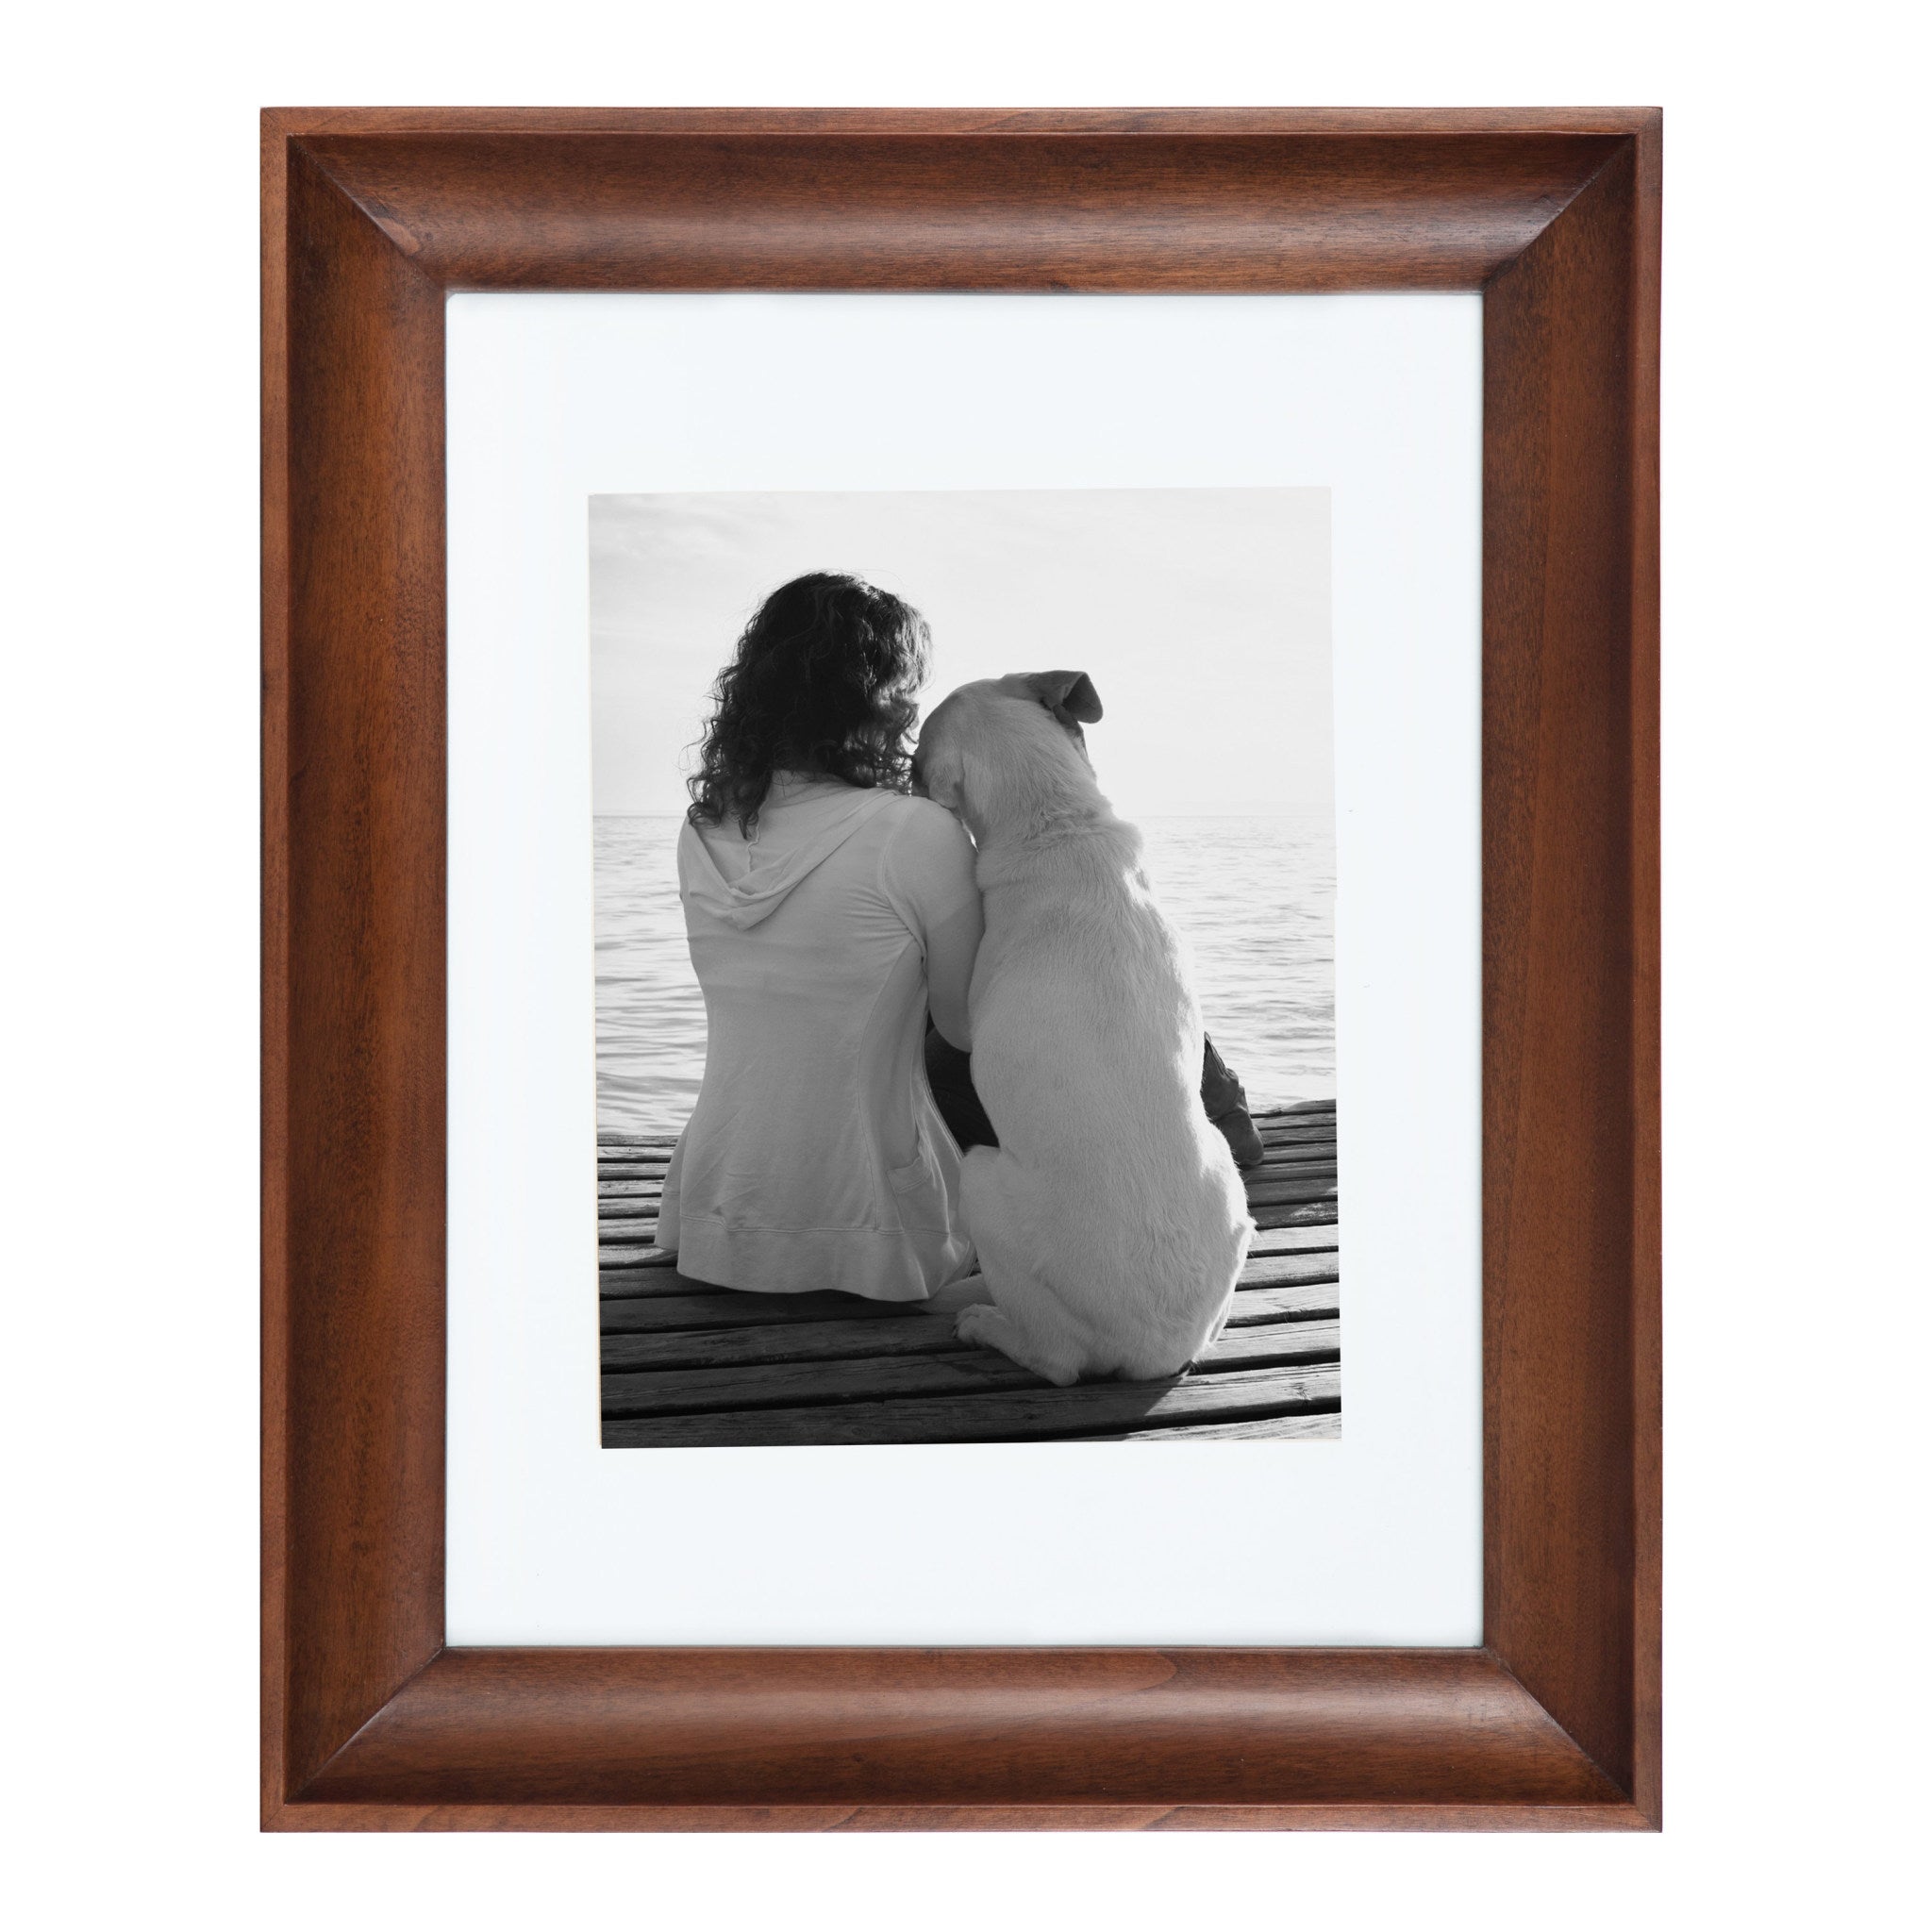 Clive Portrait Wood Wall Picture Frame